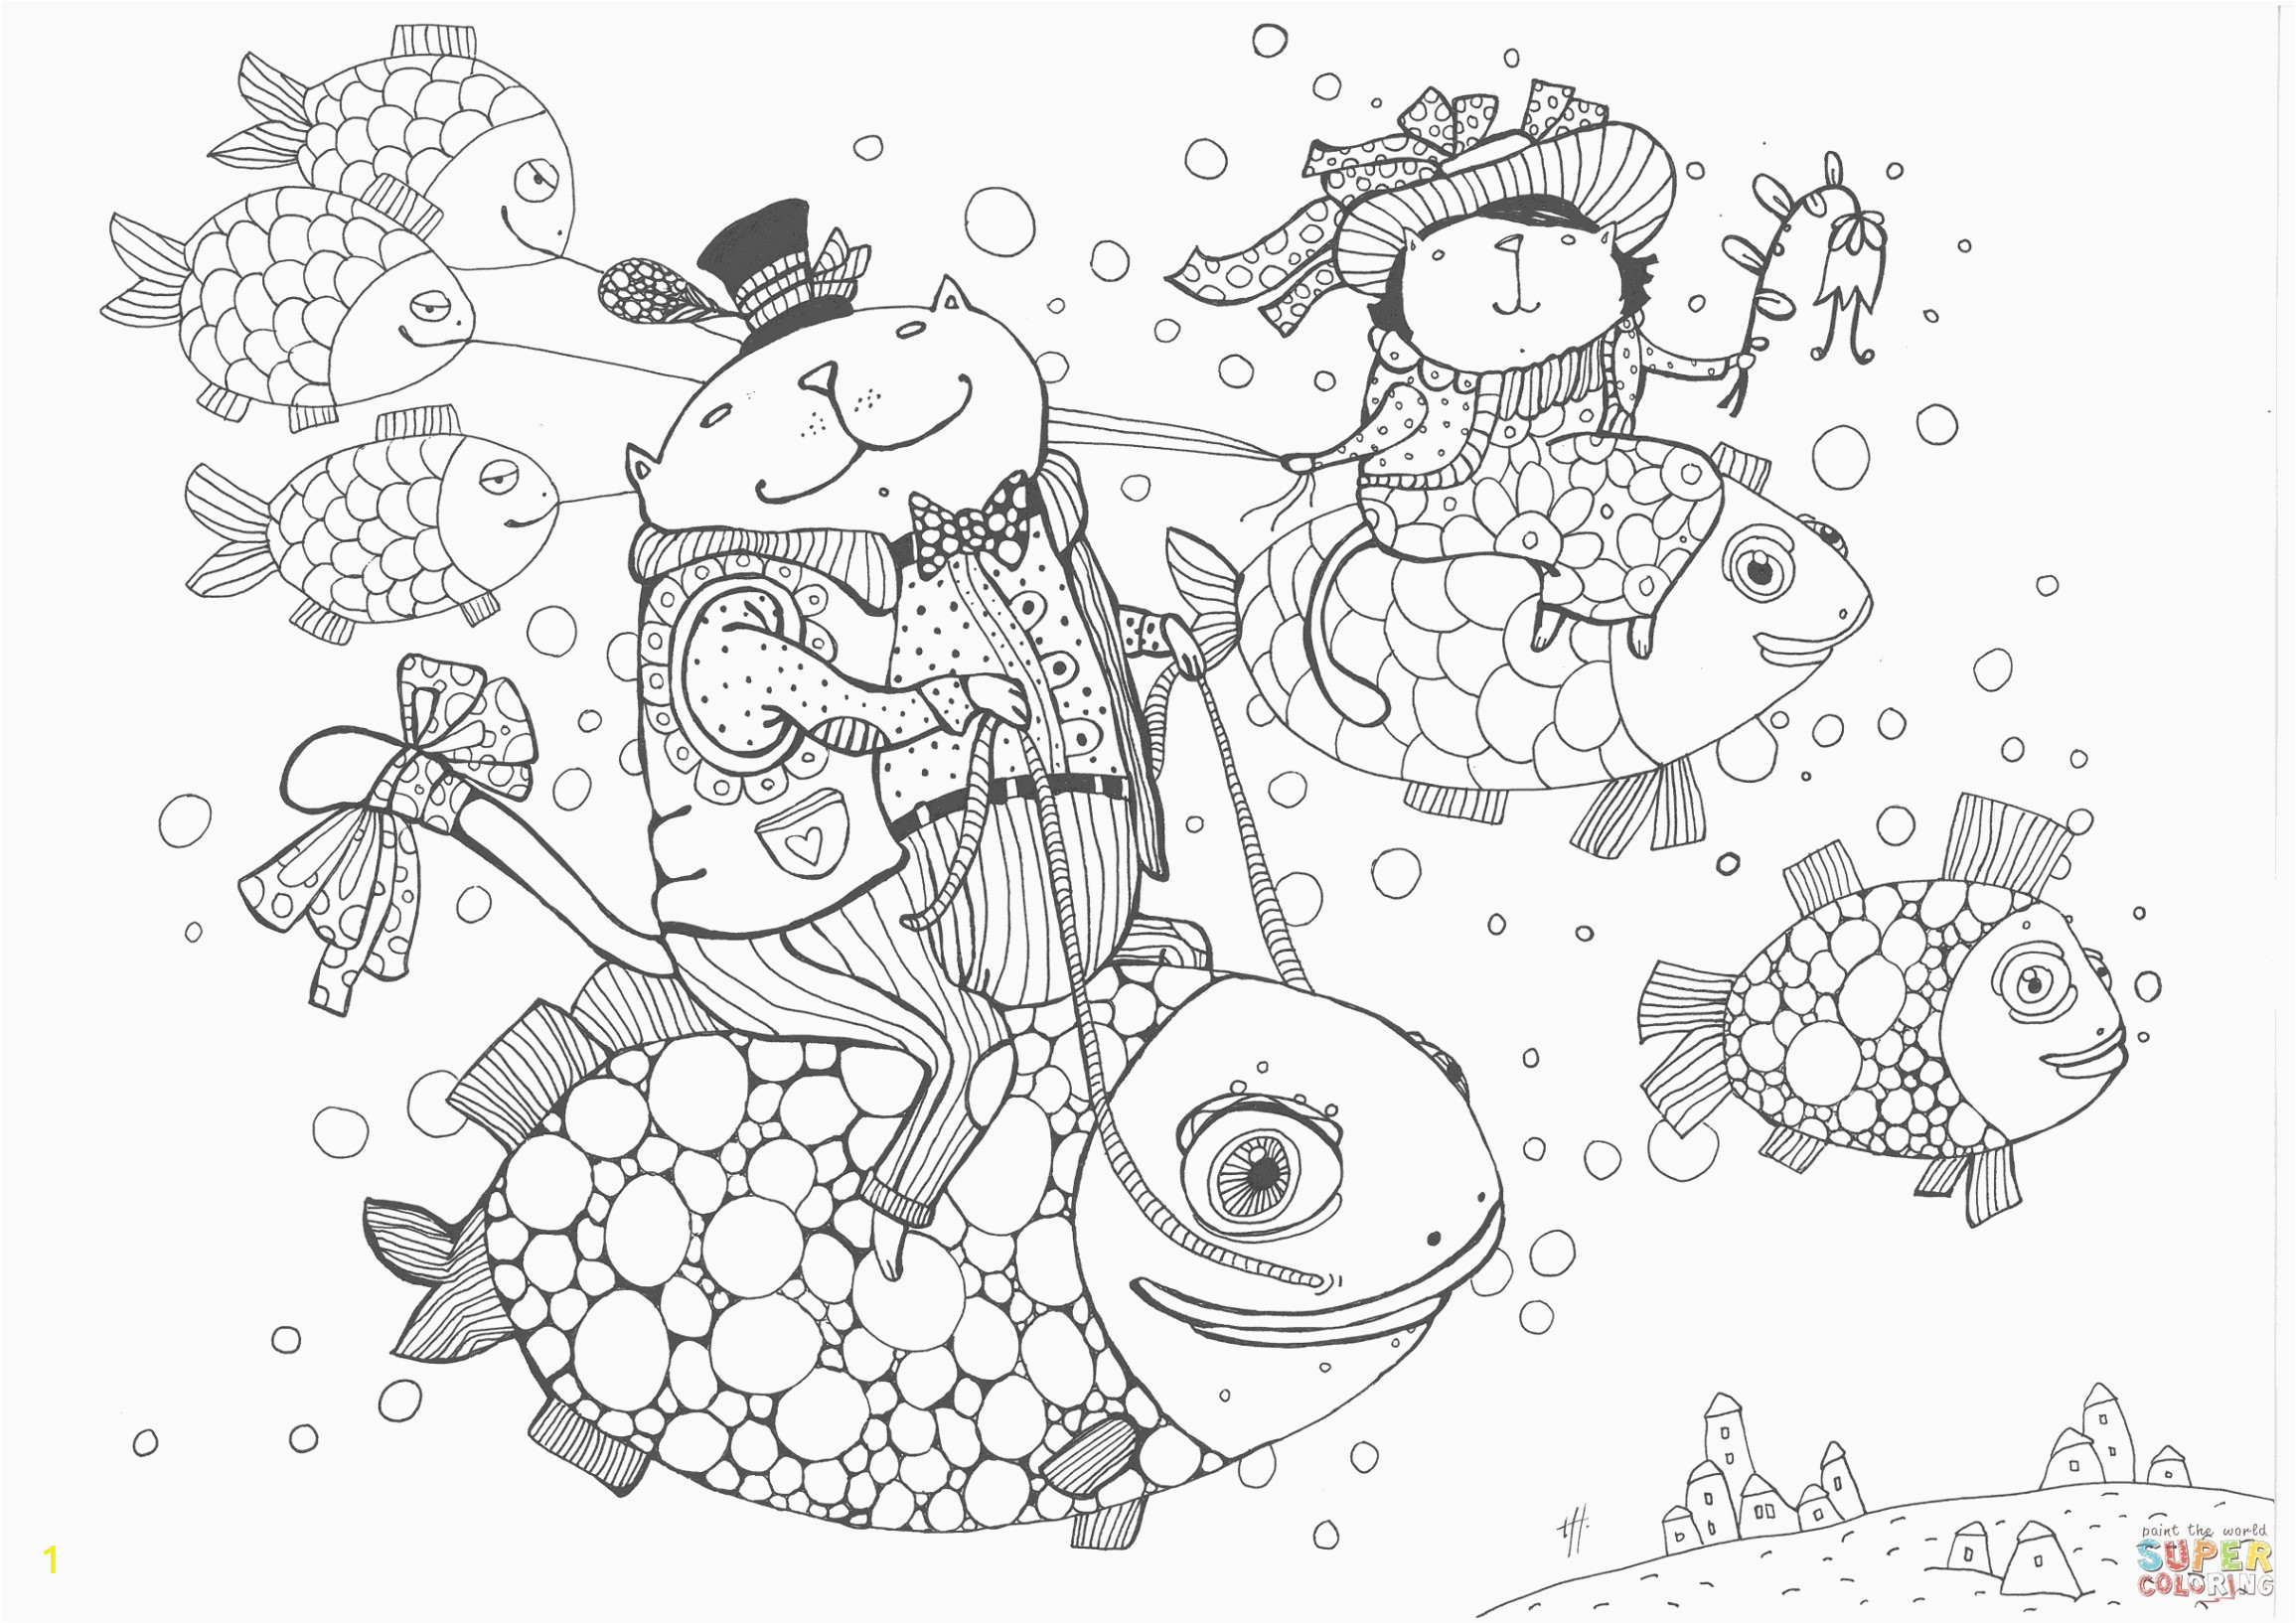 Rapunzel Printable Coloring Pages Best Coloring Pages Santa with Rudolph Inspirational